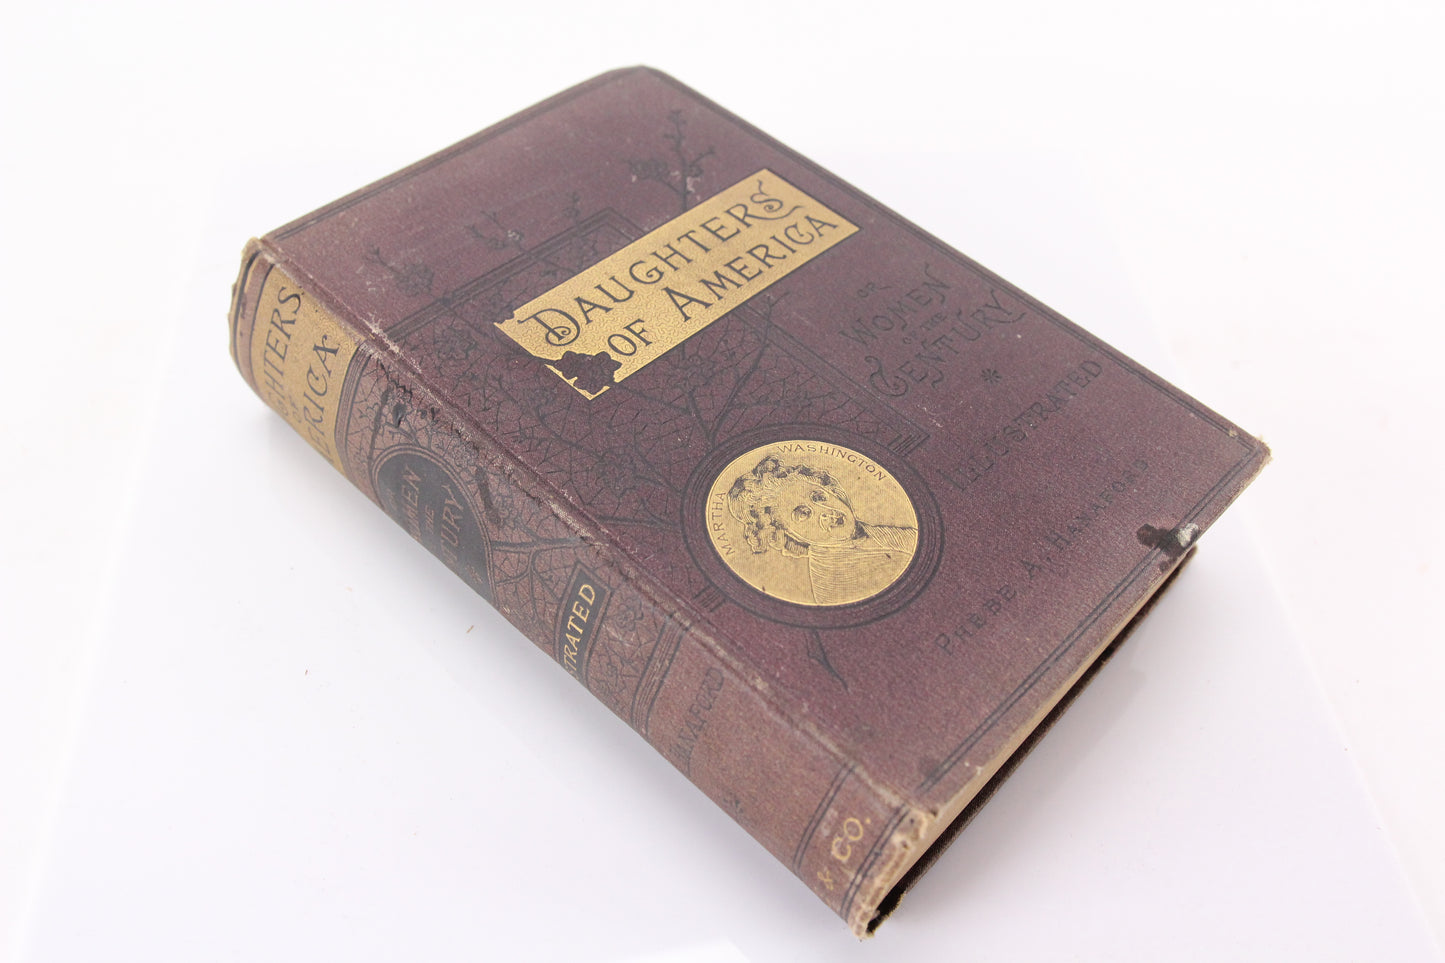 Daughters of America or Women of the Century Illustrated Book, Copyright 1882